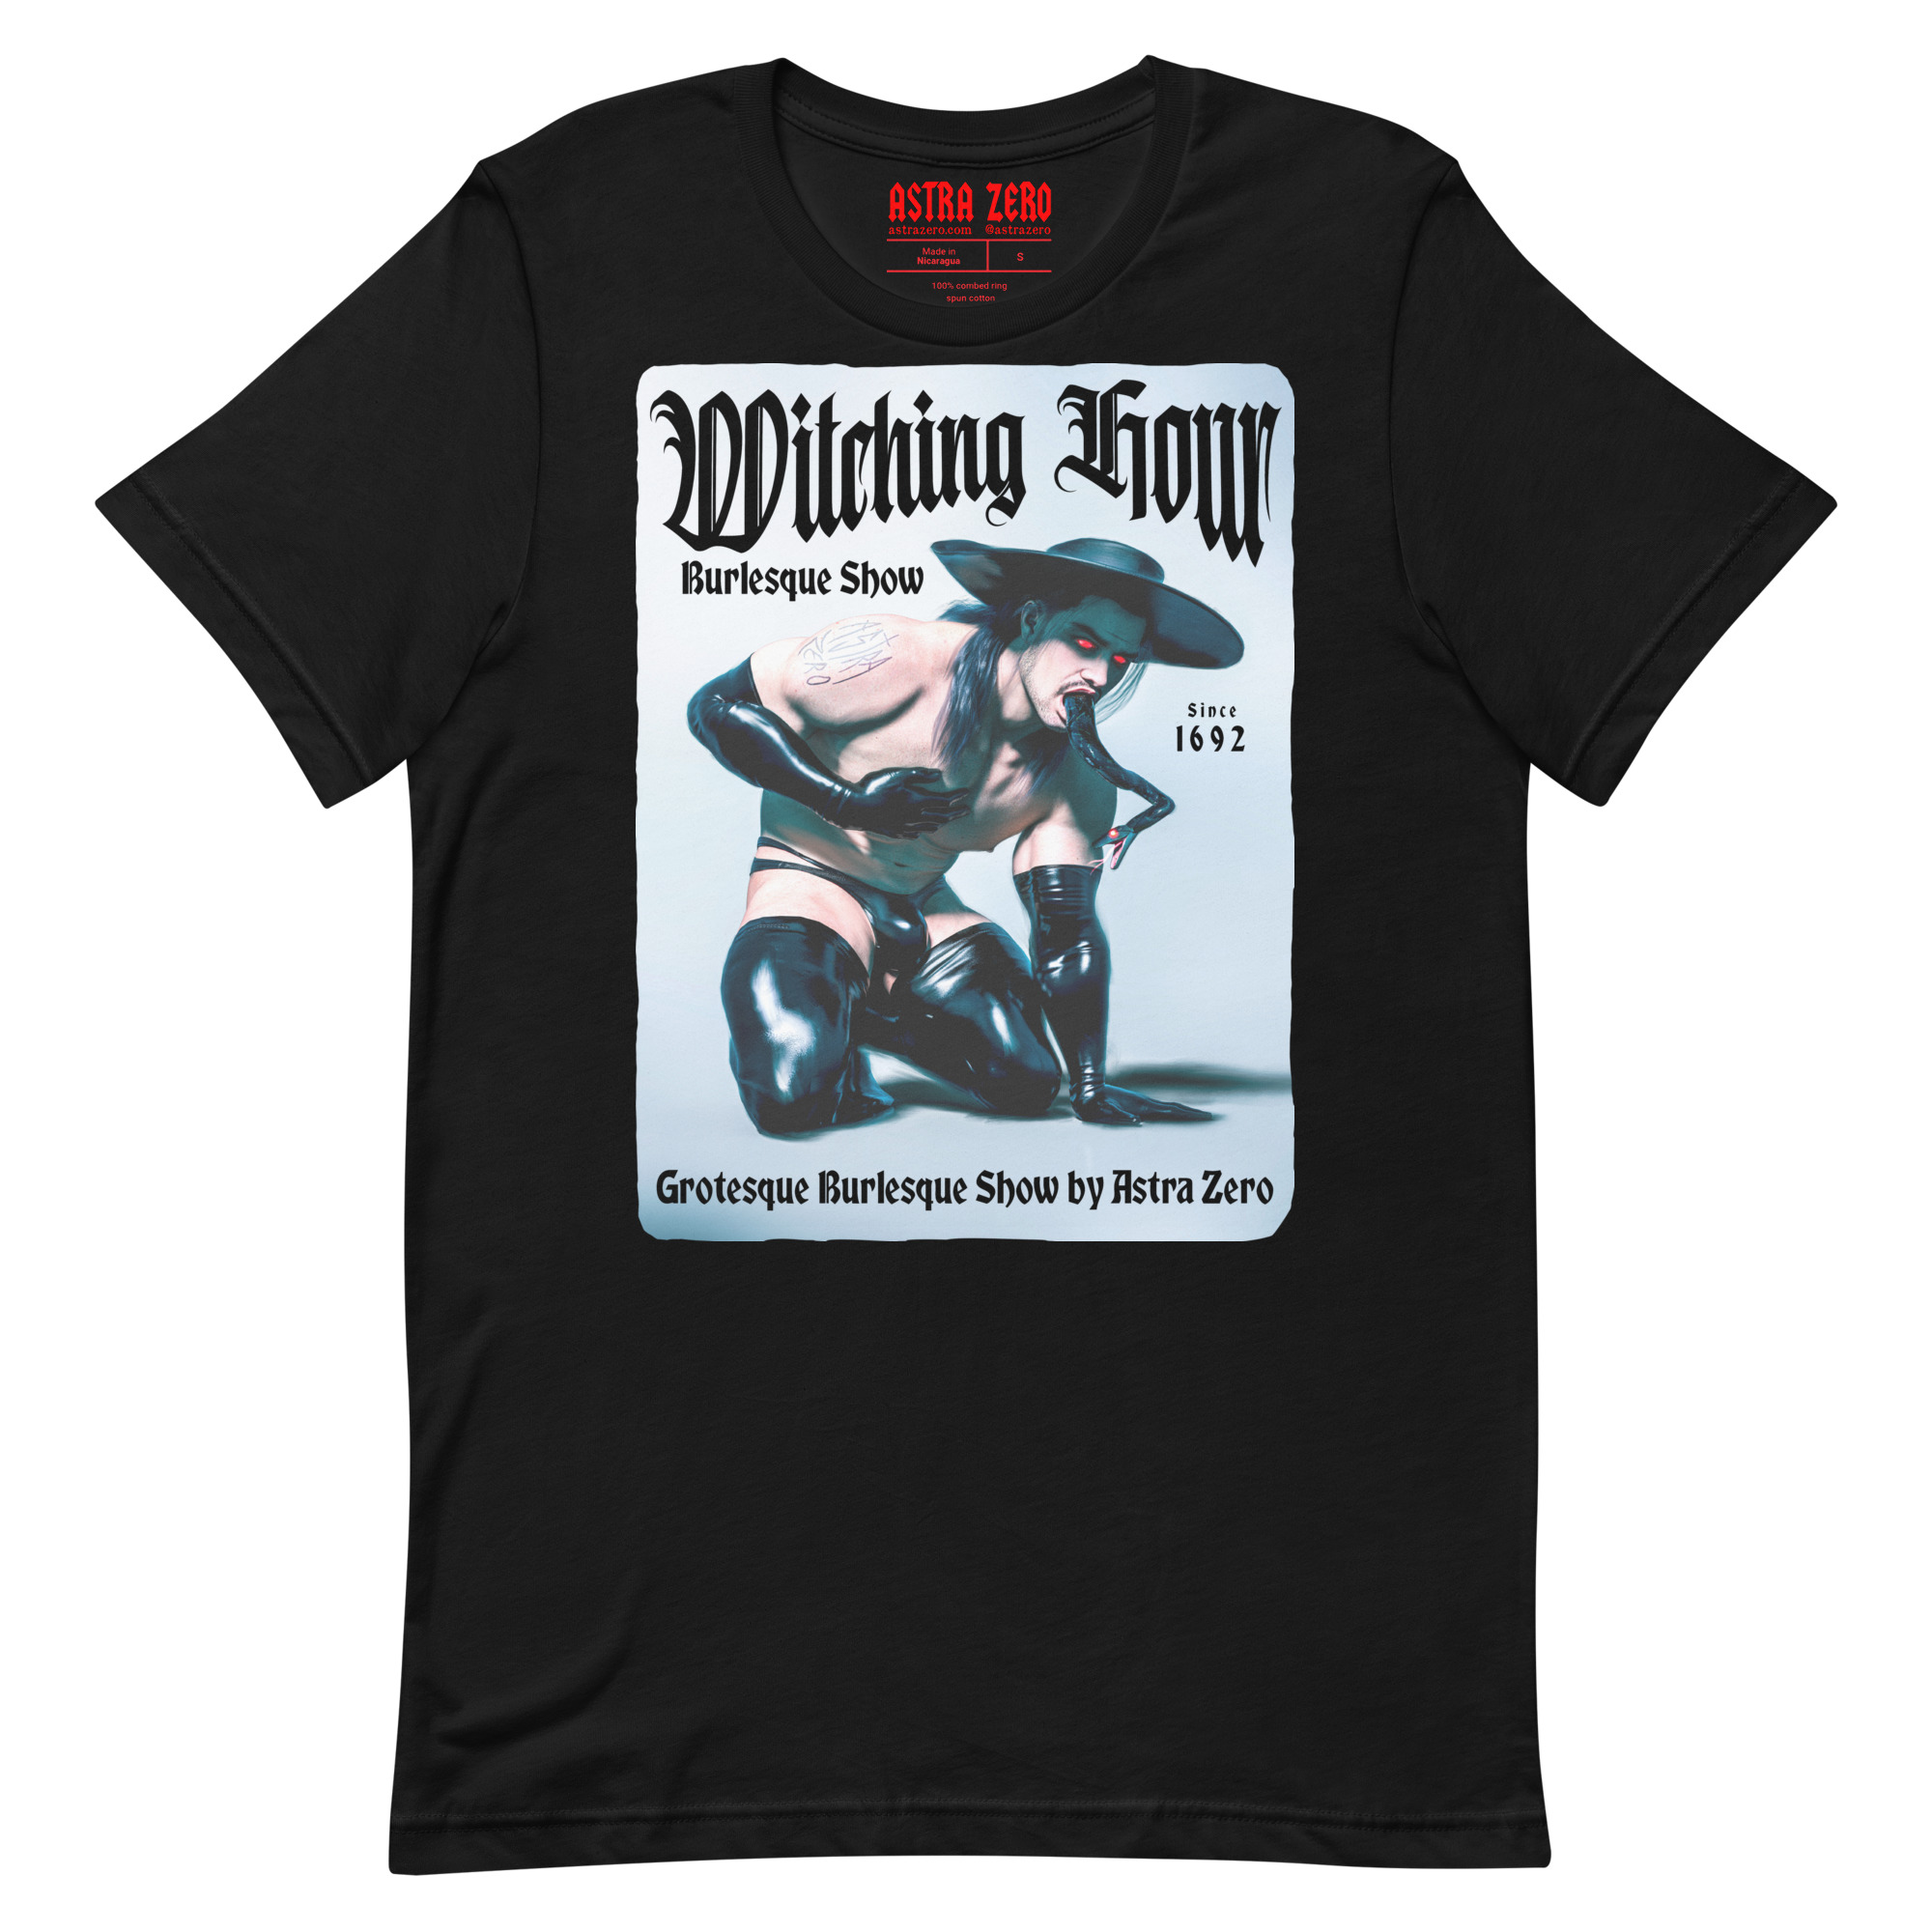 Featured image for “Witching Hour Burlesque Show - Unisex t-shirt”